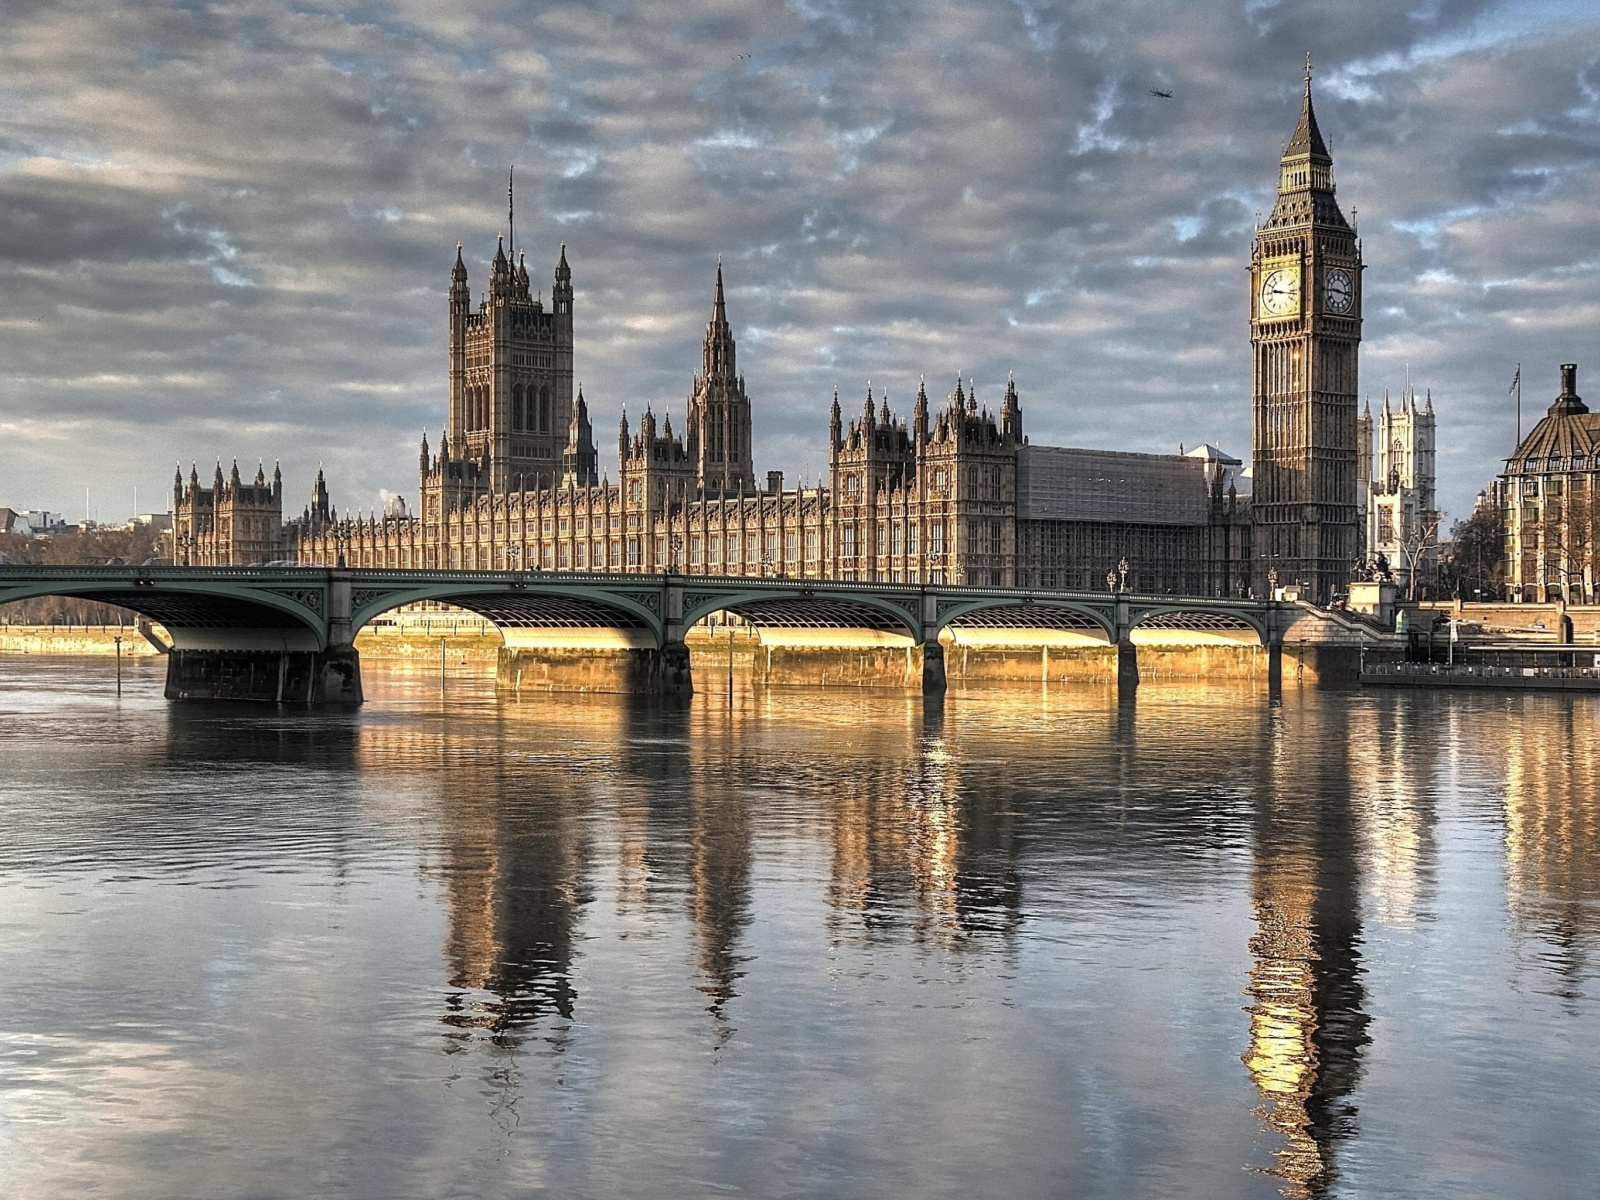 Palace of Westminster in London screenshot #1 1600x1200